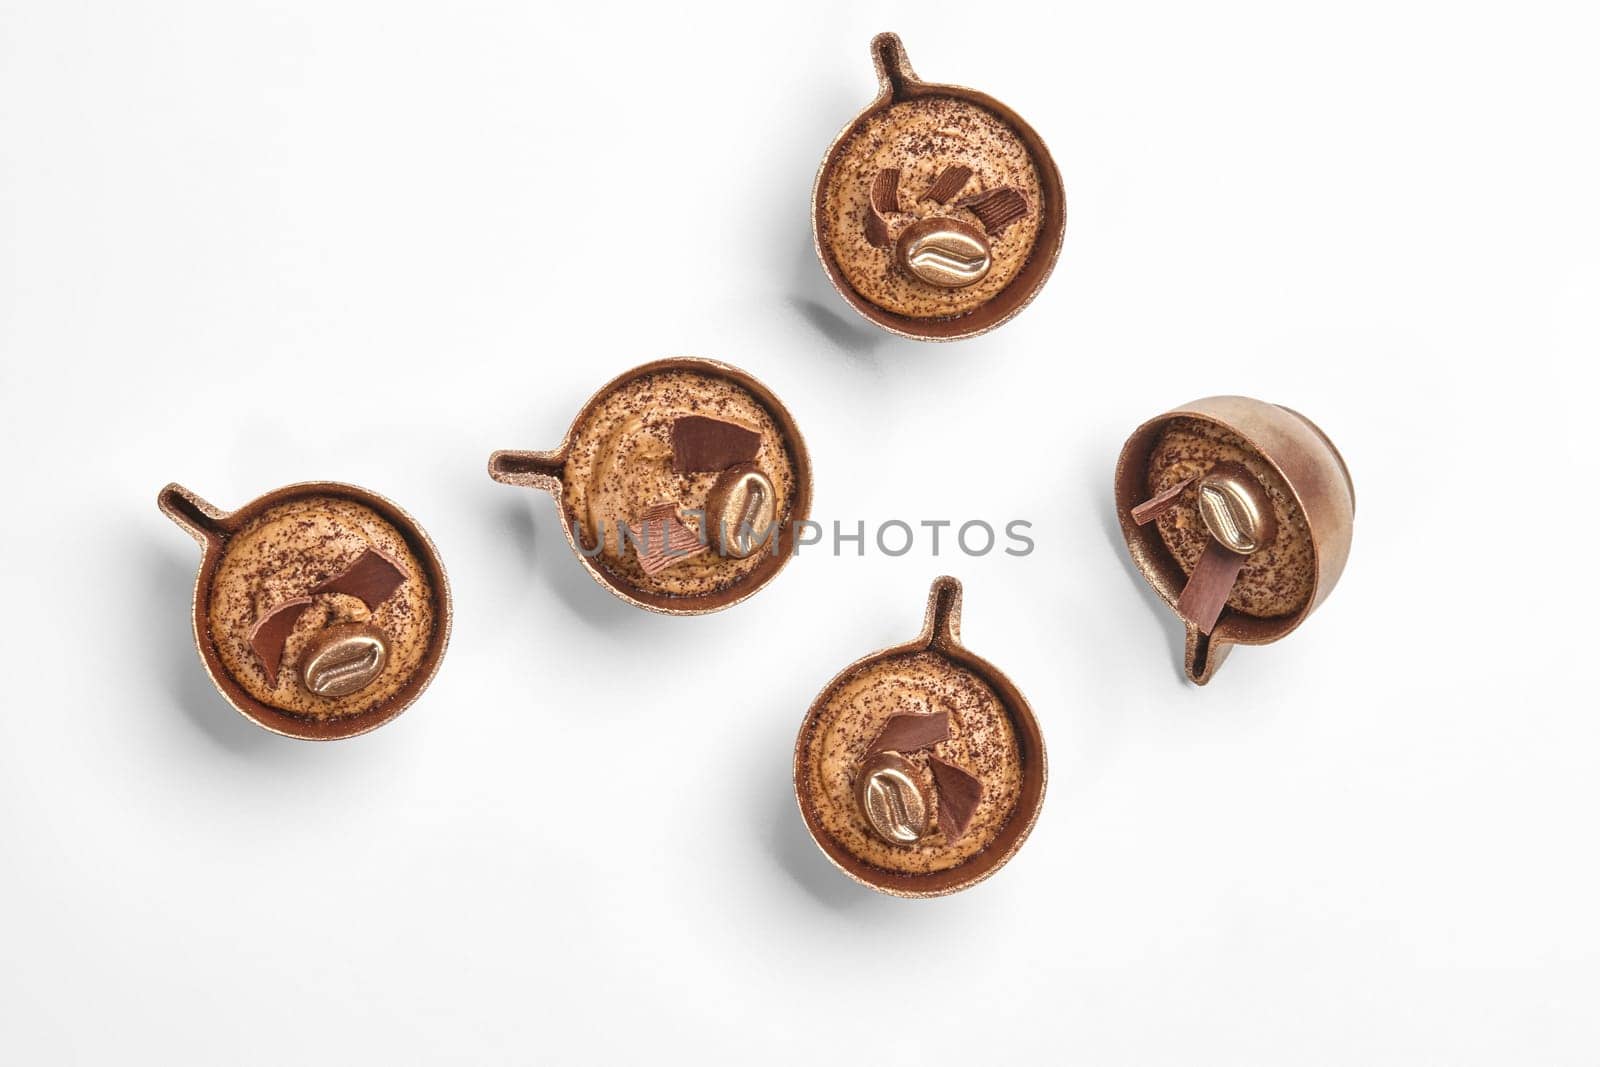 Artisan chocolate coffee candies shaped as miniature cups by nazarovsergey